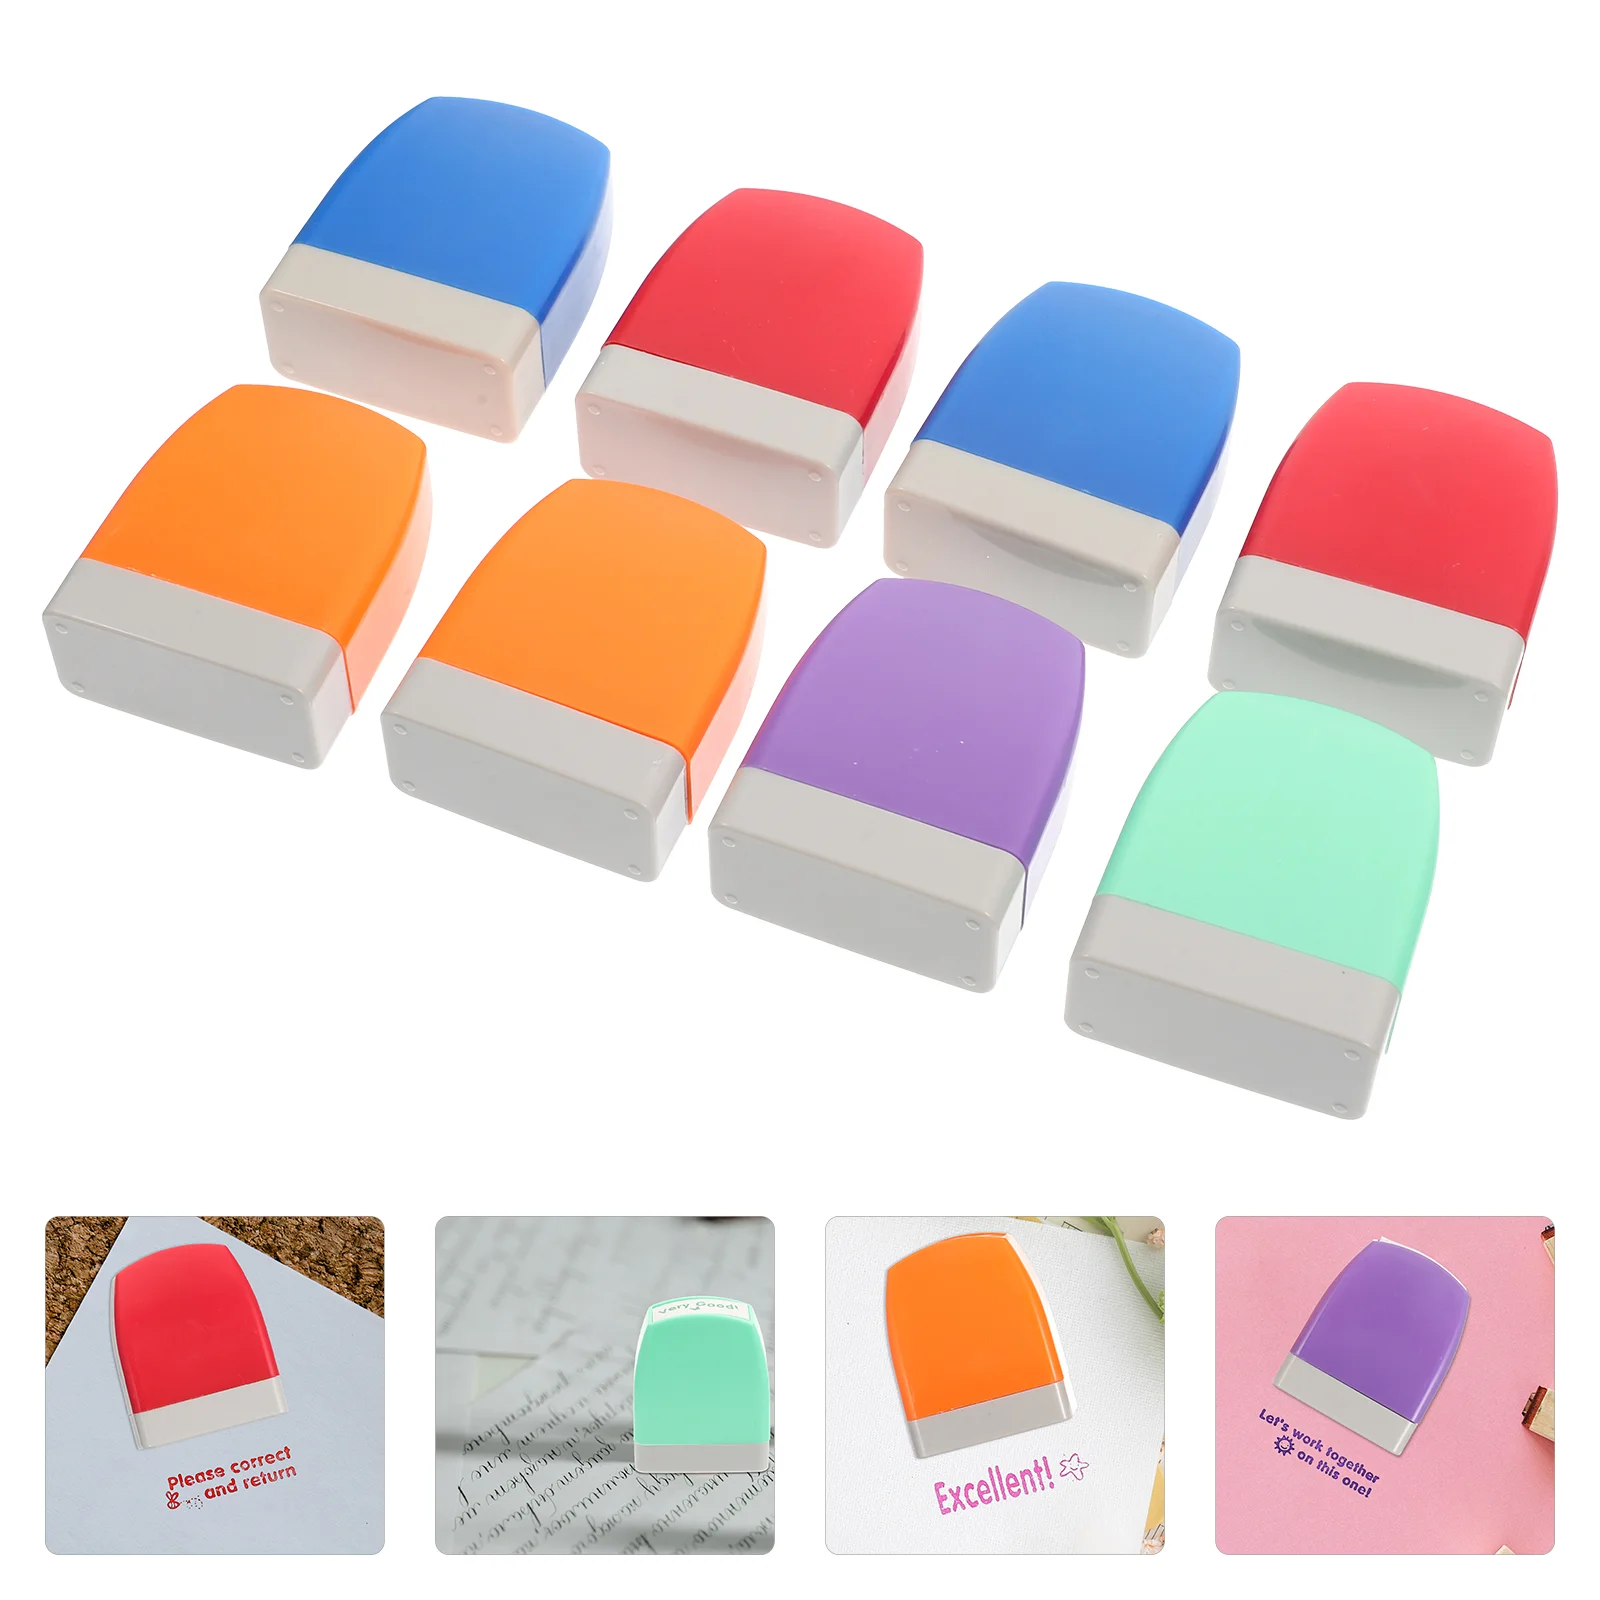 

8 Pcs Encouragement Stamp Set Small Stamps DIY Stampers Portable Teacher Kids Name Comments Students English School